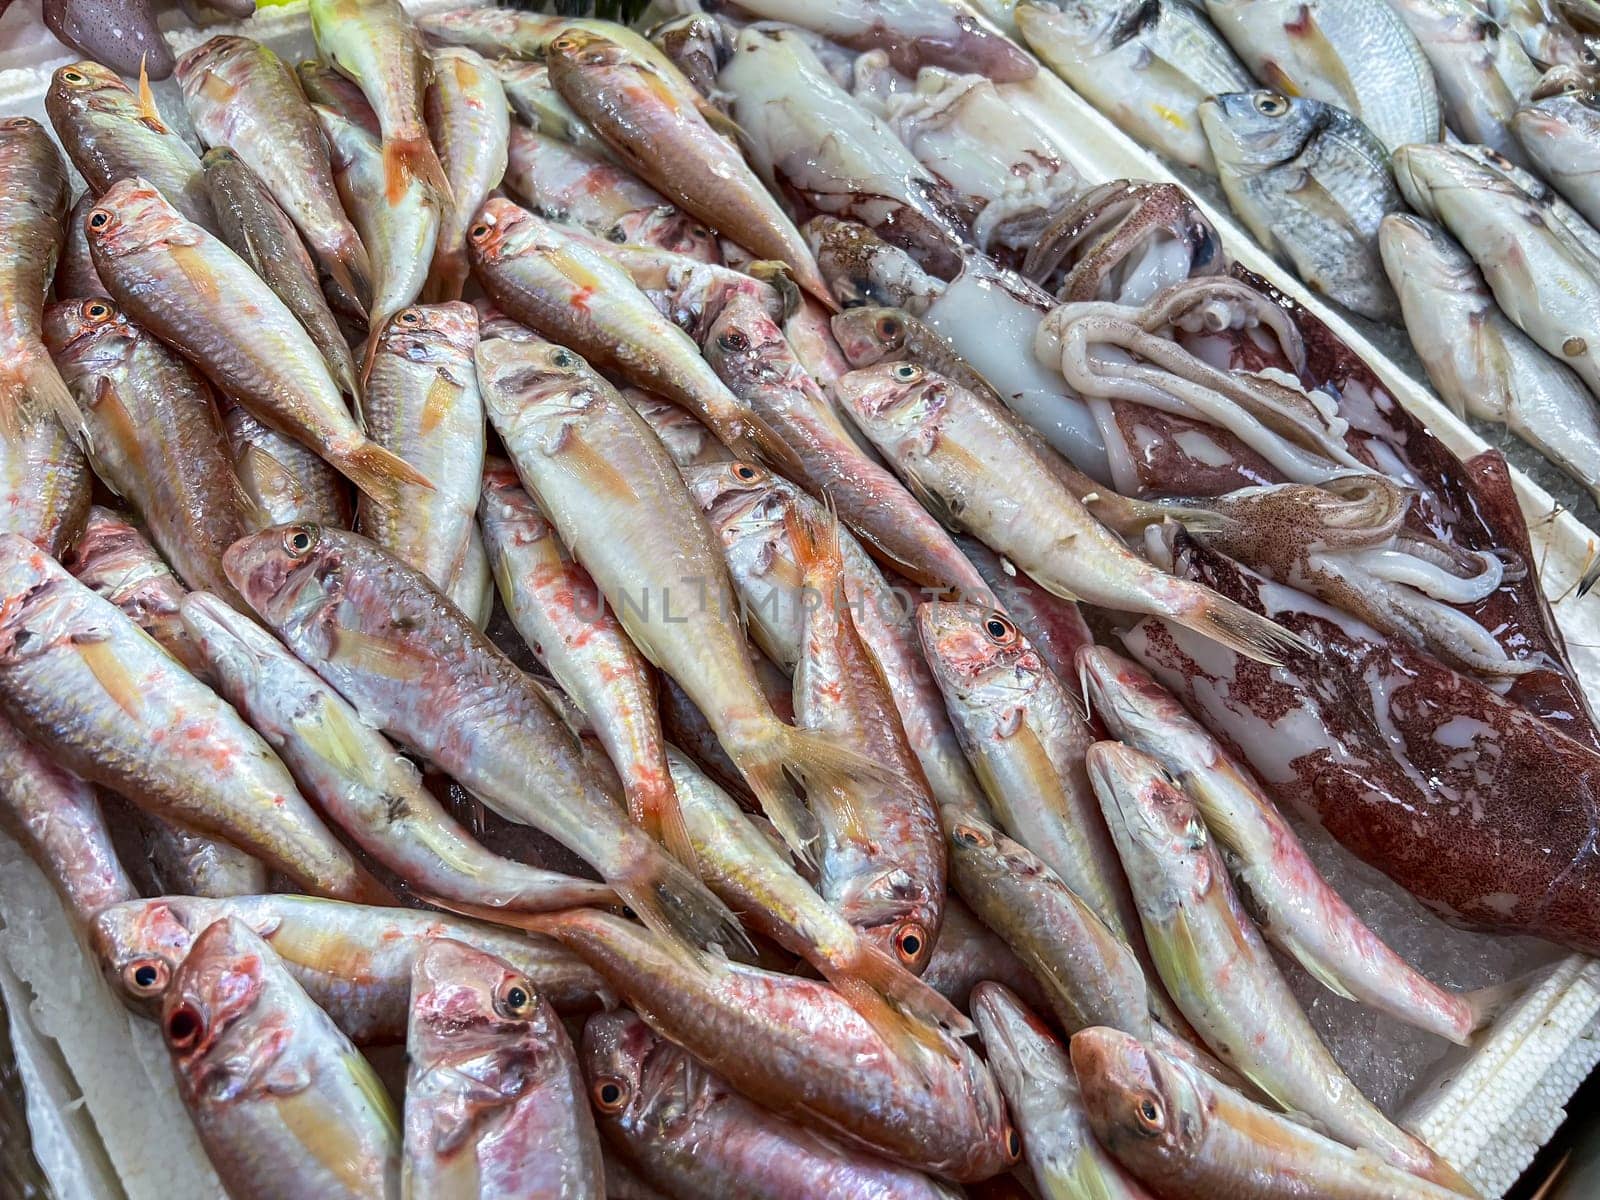 Top view of raw red mullet fish on ice on display at seafood fish market